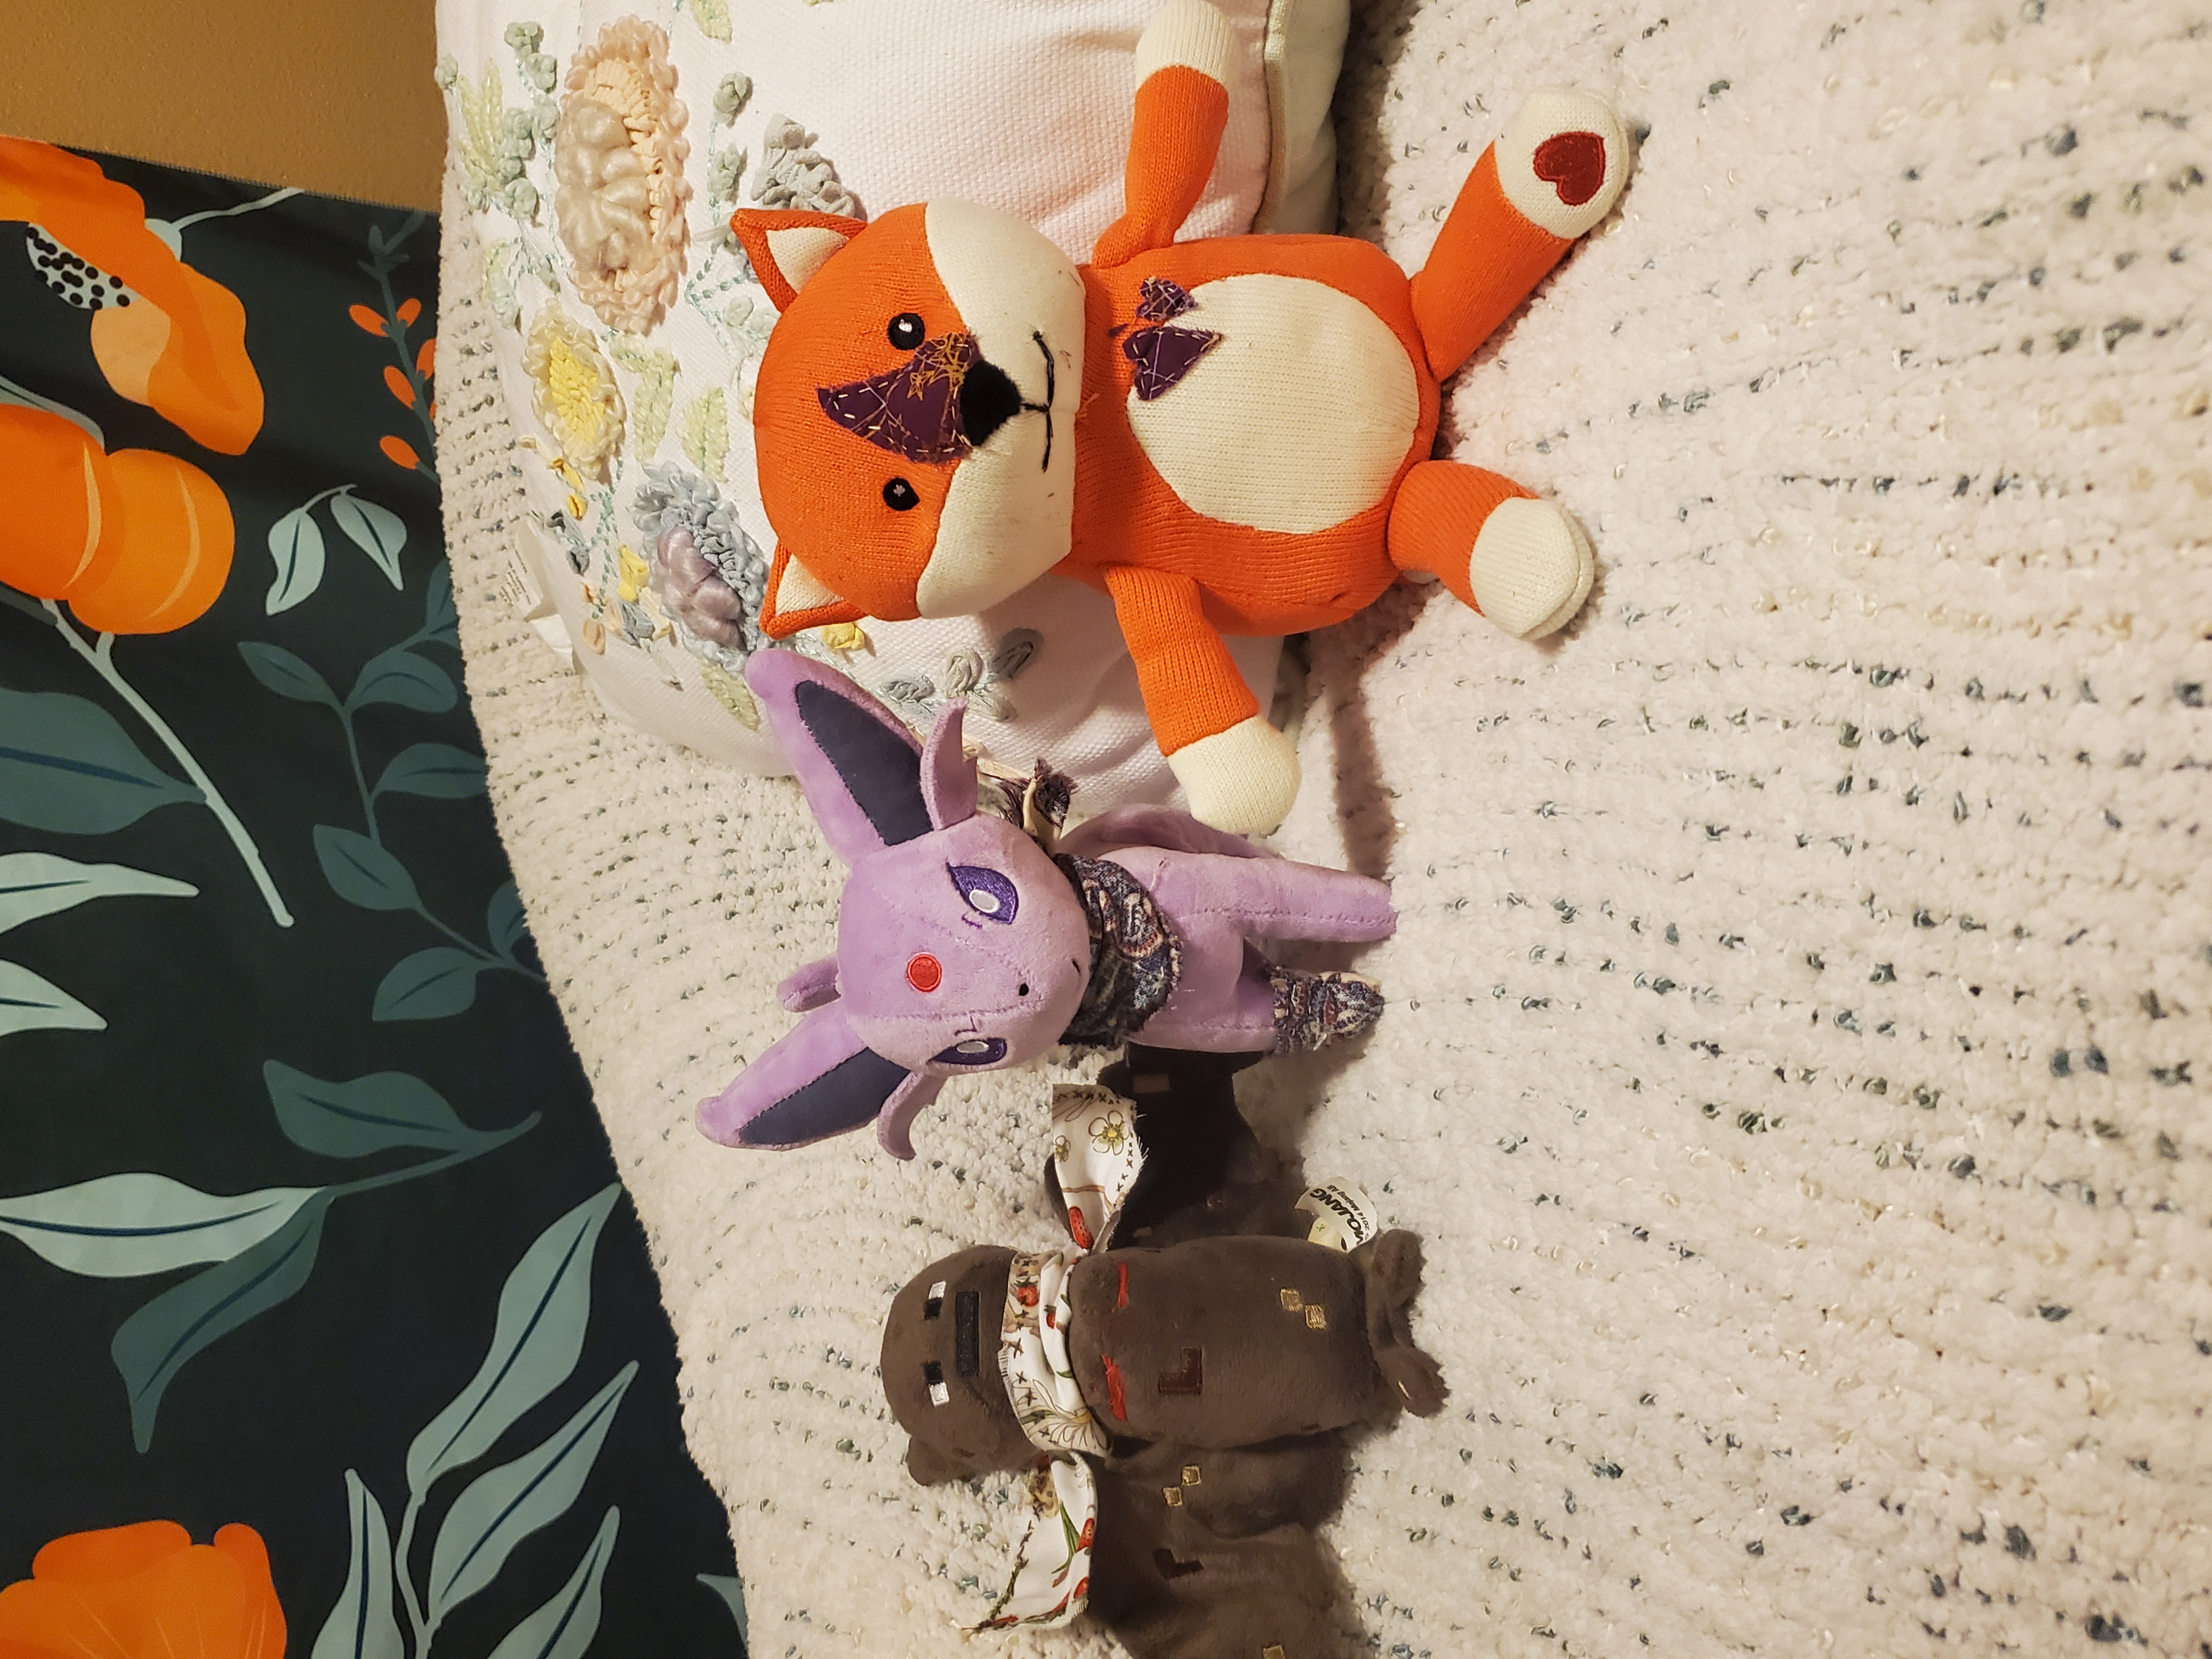 photo of 3 plushies. from left to right, first is a minecraft bat plushie from 2014 with a cross-sitched scarf, patterned with strawberries and mice. it also has embroidered top surgey scars sown on. second is an espeon plushie with a purple, white and magenta scarf and sock. third plushie is a bright orange, lopsided fox plushie with embroidered black eyes and nose. they also white paws, belly, cheeks, and ears with a red heart on their right foot. their snout has purple fabric stitched on, along with purple hearts on their belly. they have black thread stitched on their face in a smile.